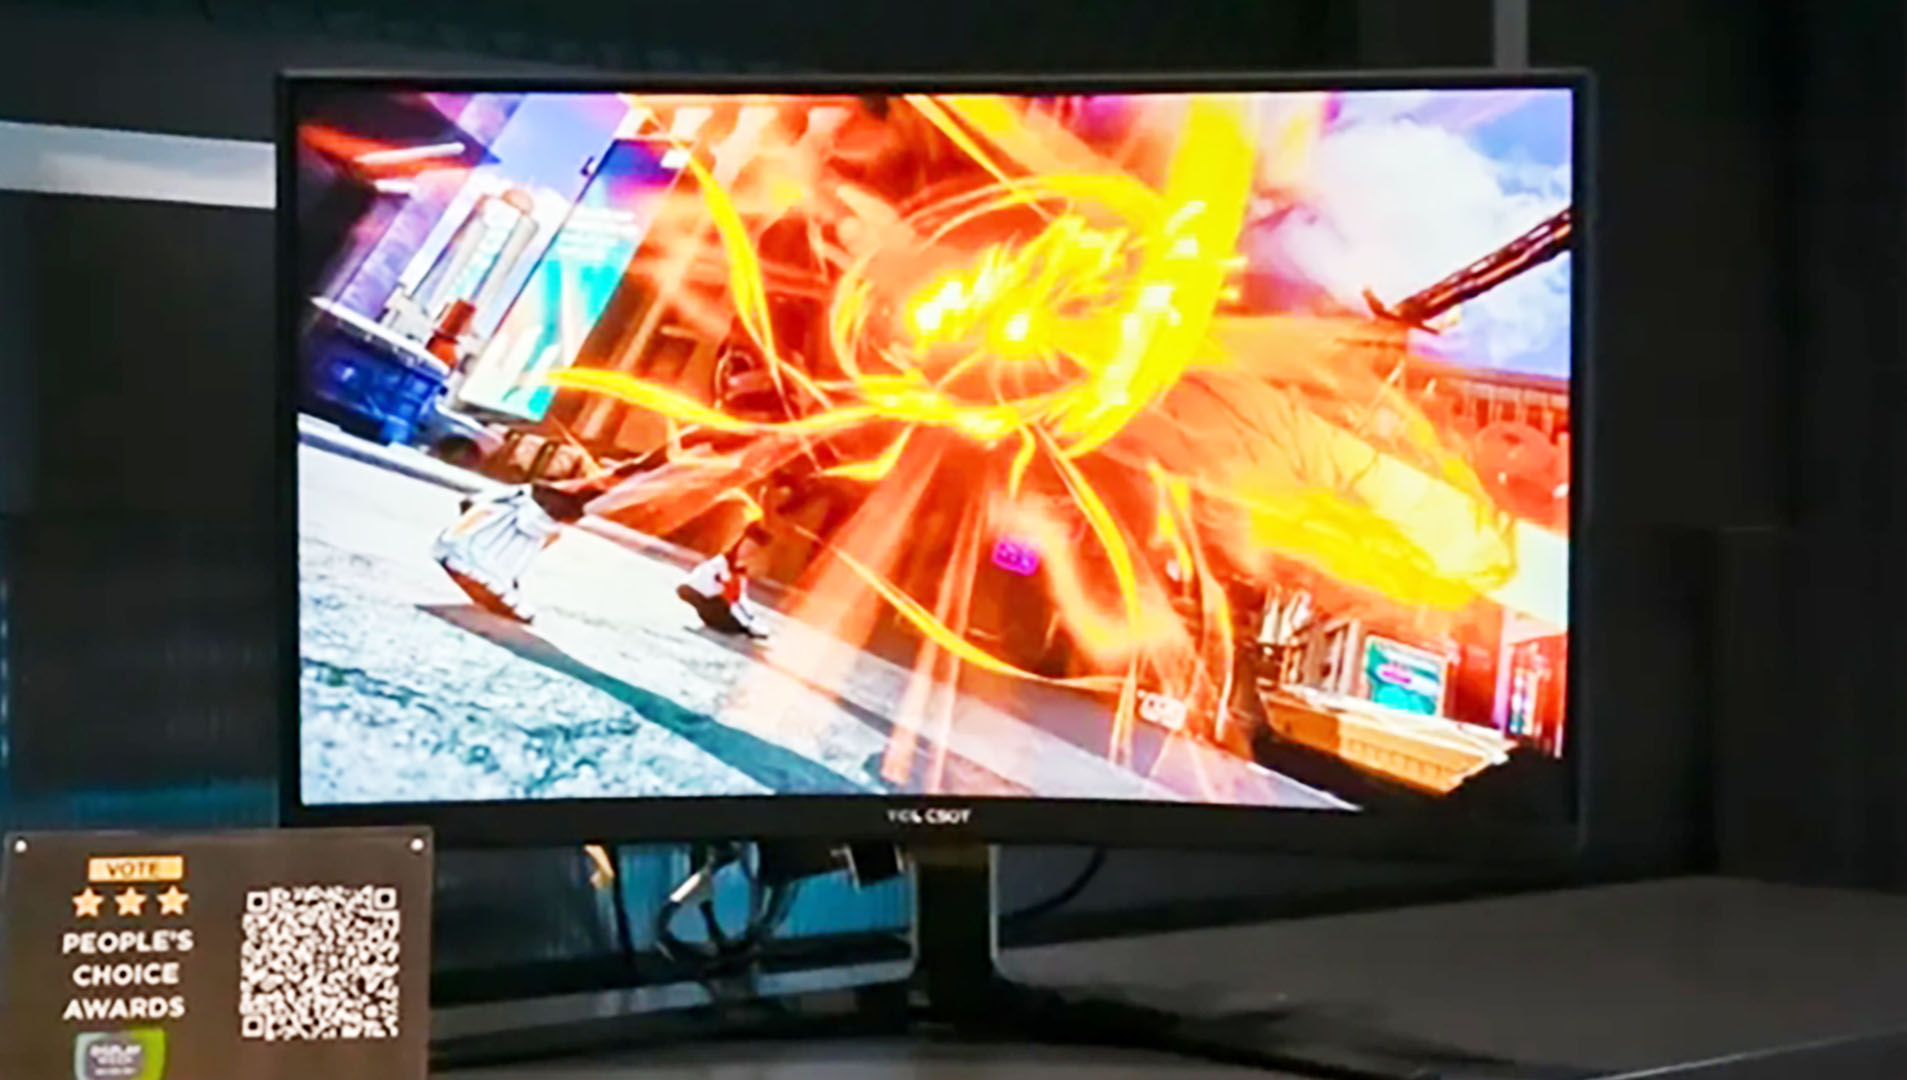 This 4K gaming monitor has a 1,000Hz (yes, 1,000Hz) refresh rate